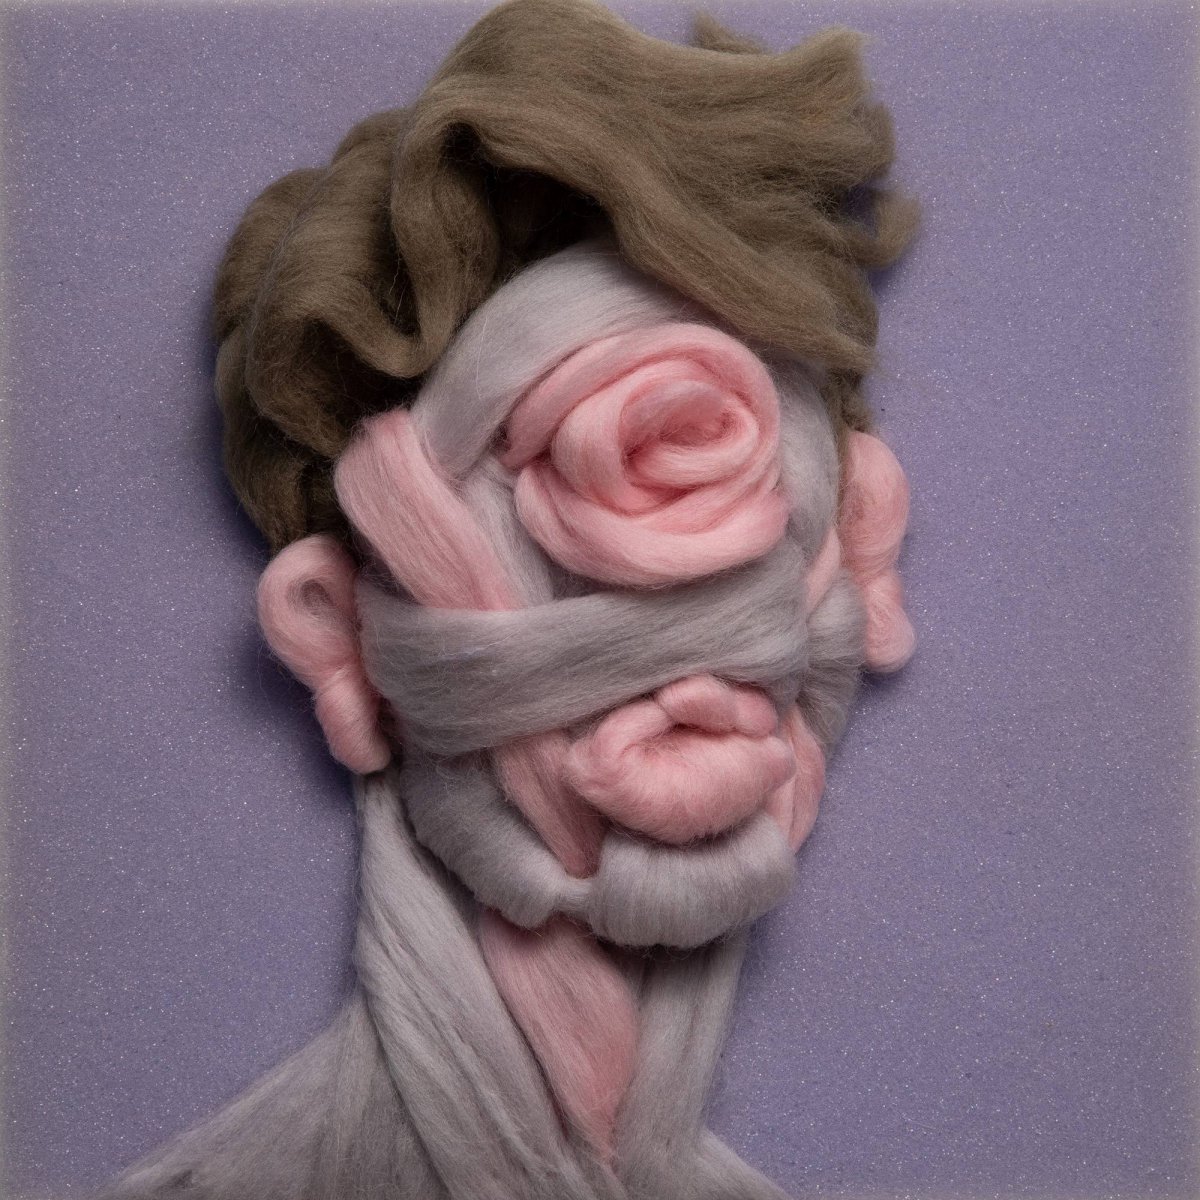 Expressive Sculptural Portraits Made Of Raw Wool By Salman Khoshroo 7